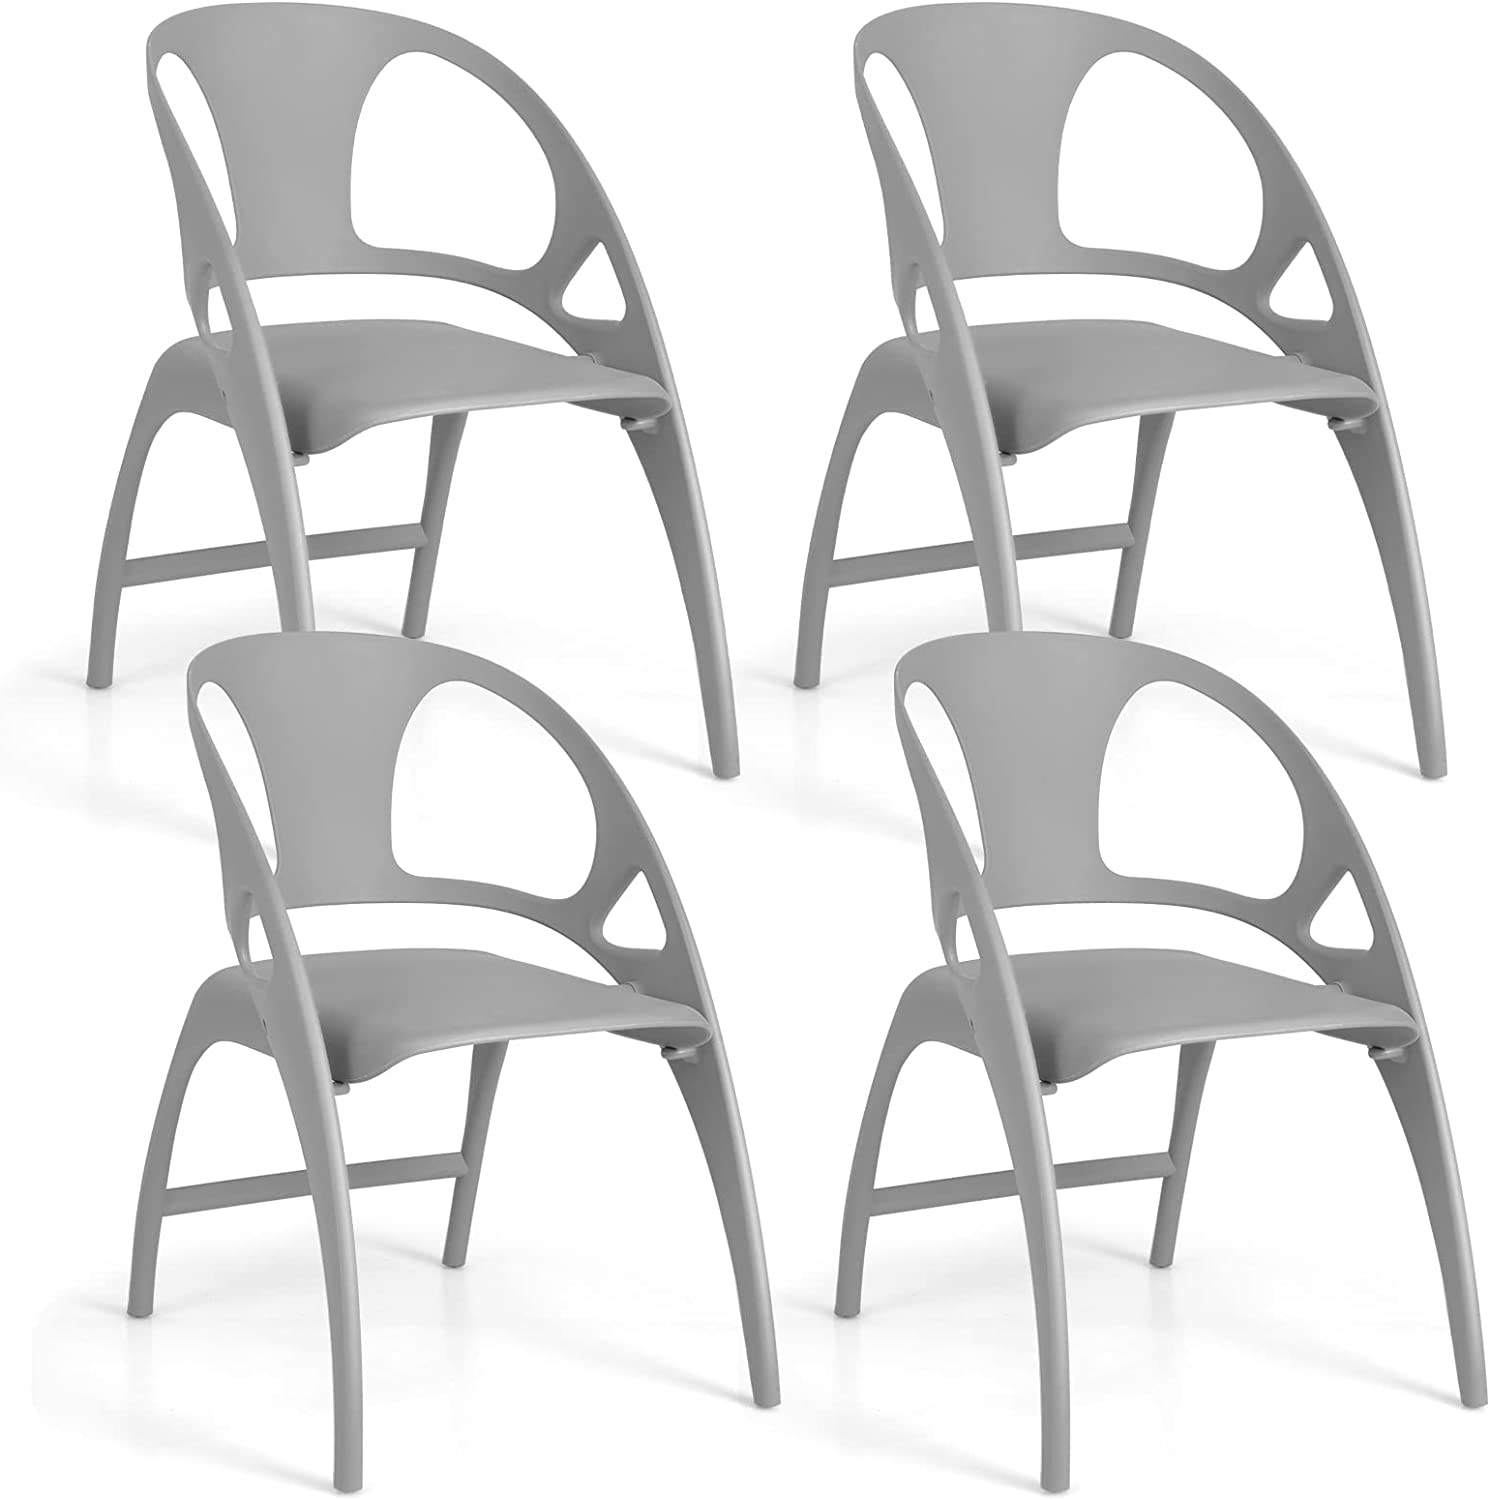 Giantex Folding Dining Chairs Set of 2/4, Outdoor Plastic Dining Chairs with Armrest and High Backrest